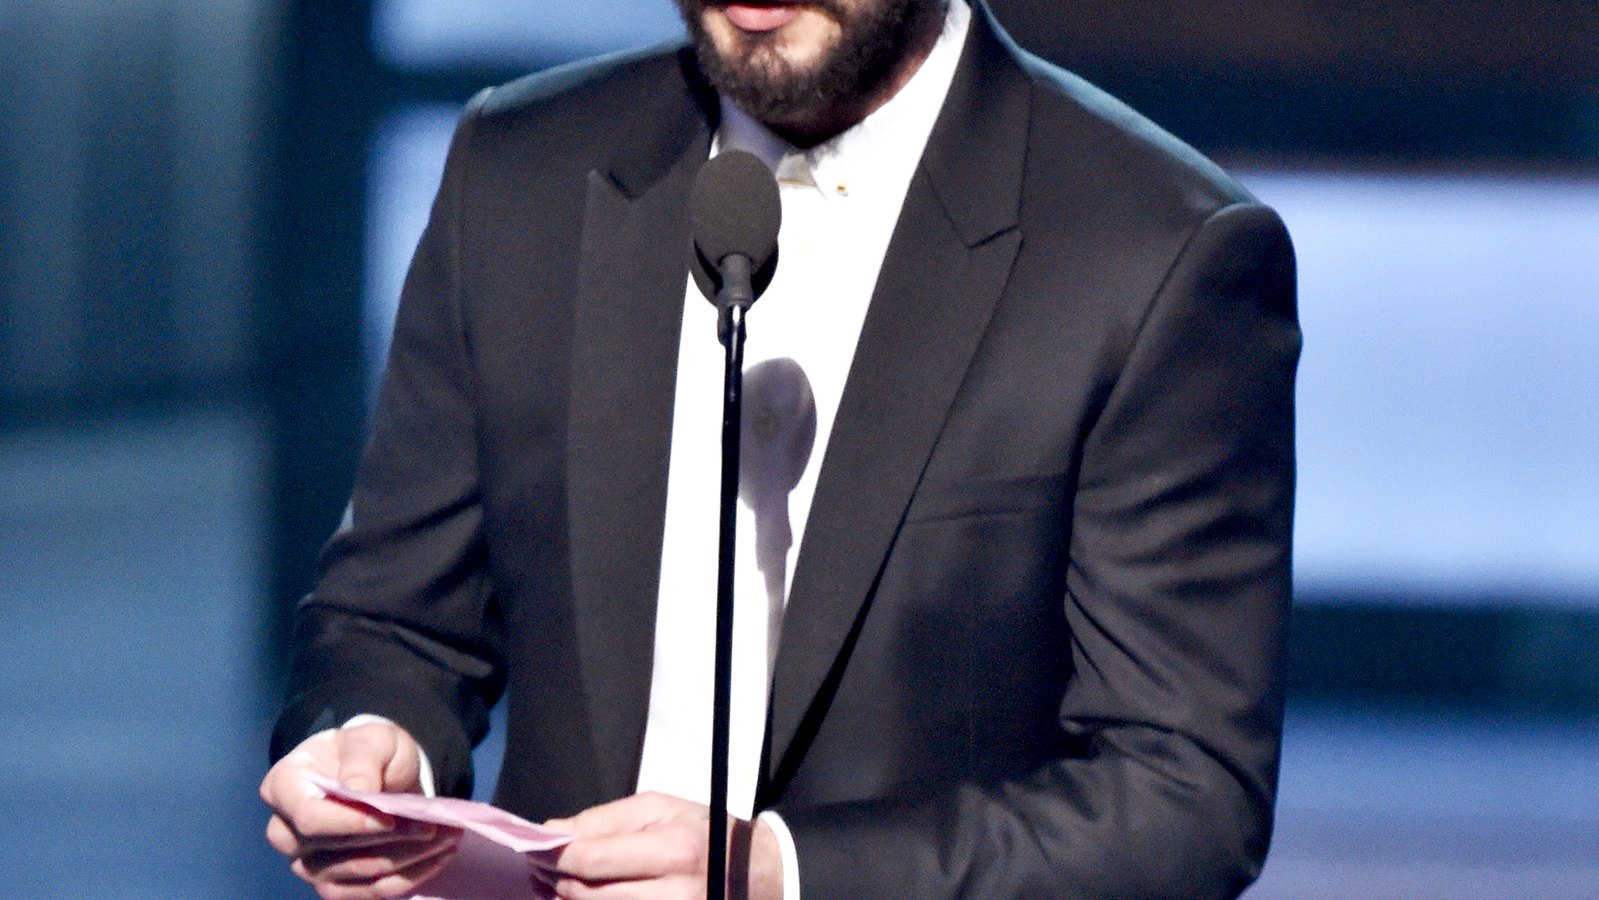 Shia LaBeouf Reads Love Letter to Sia